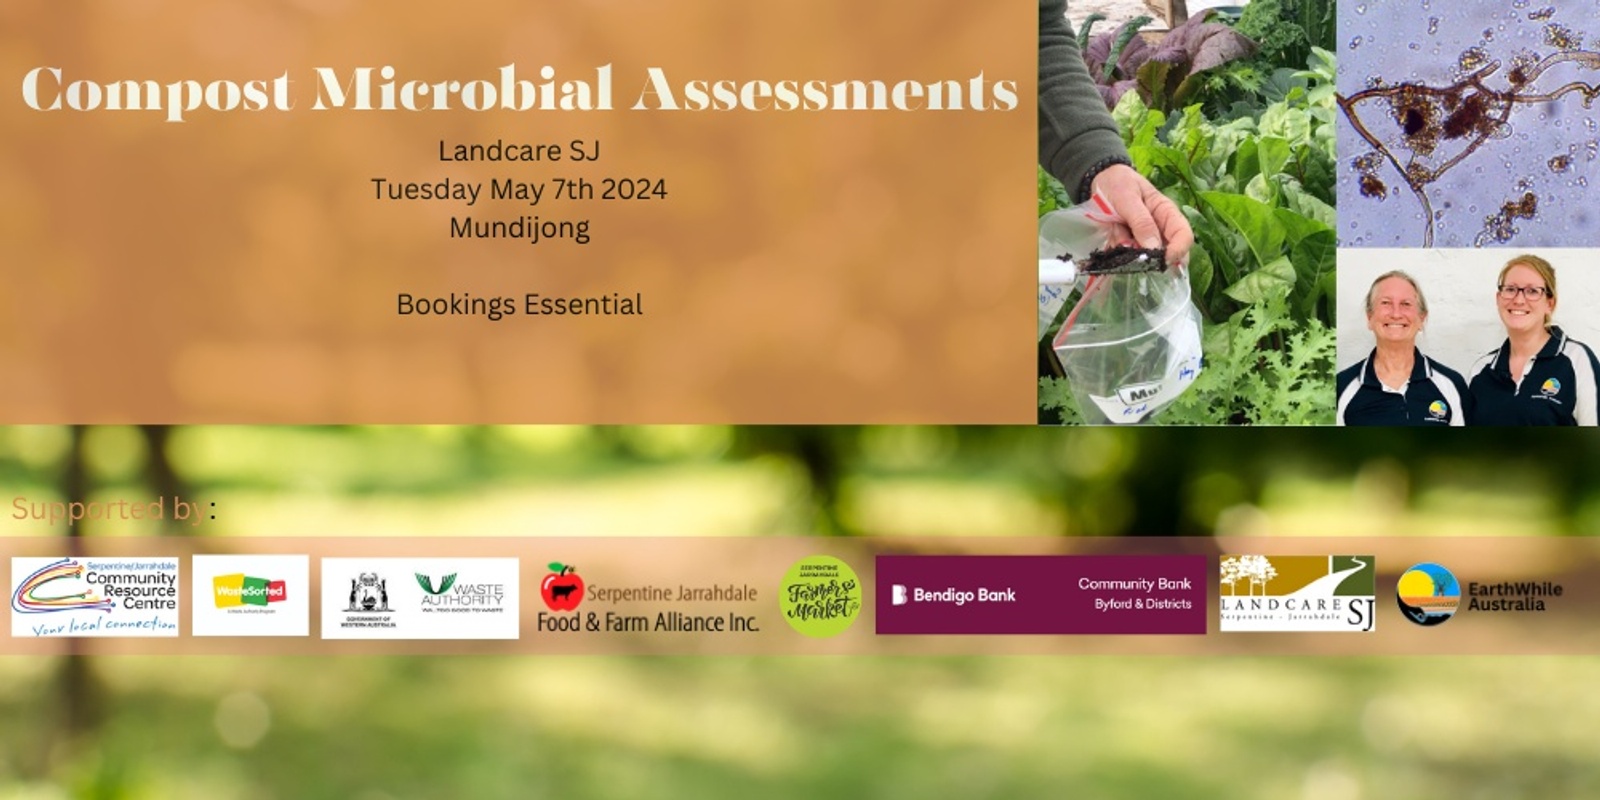 Banner image for Compost Microbial Assessments Waste Sorted at Landcare